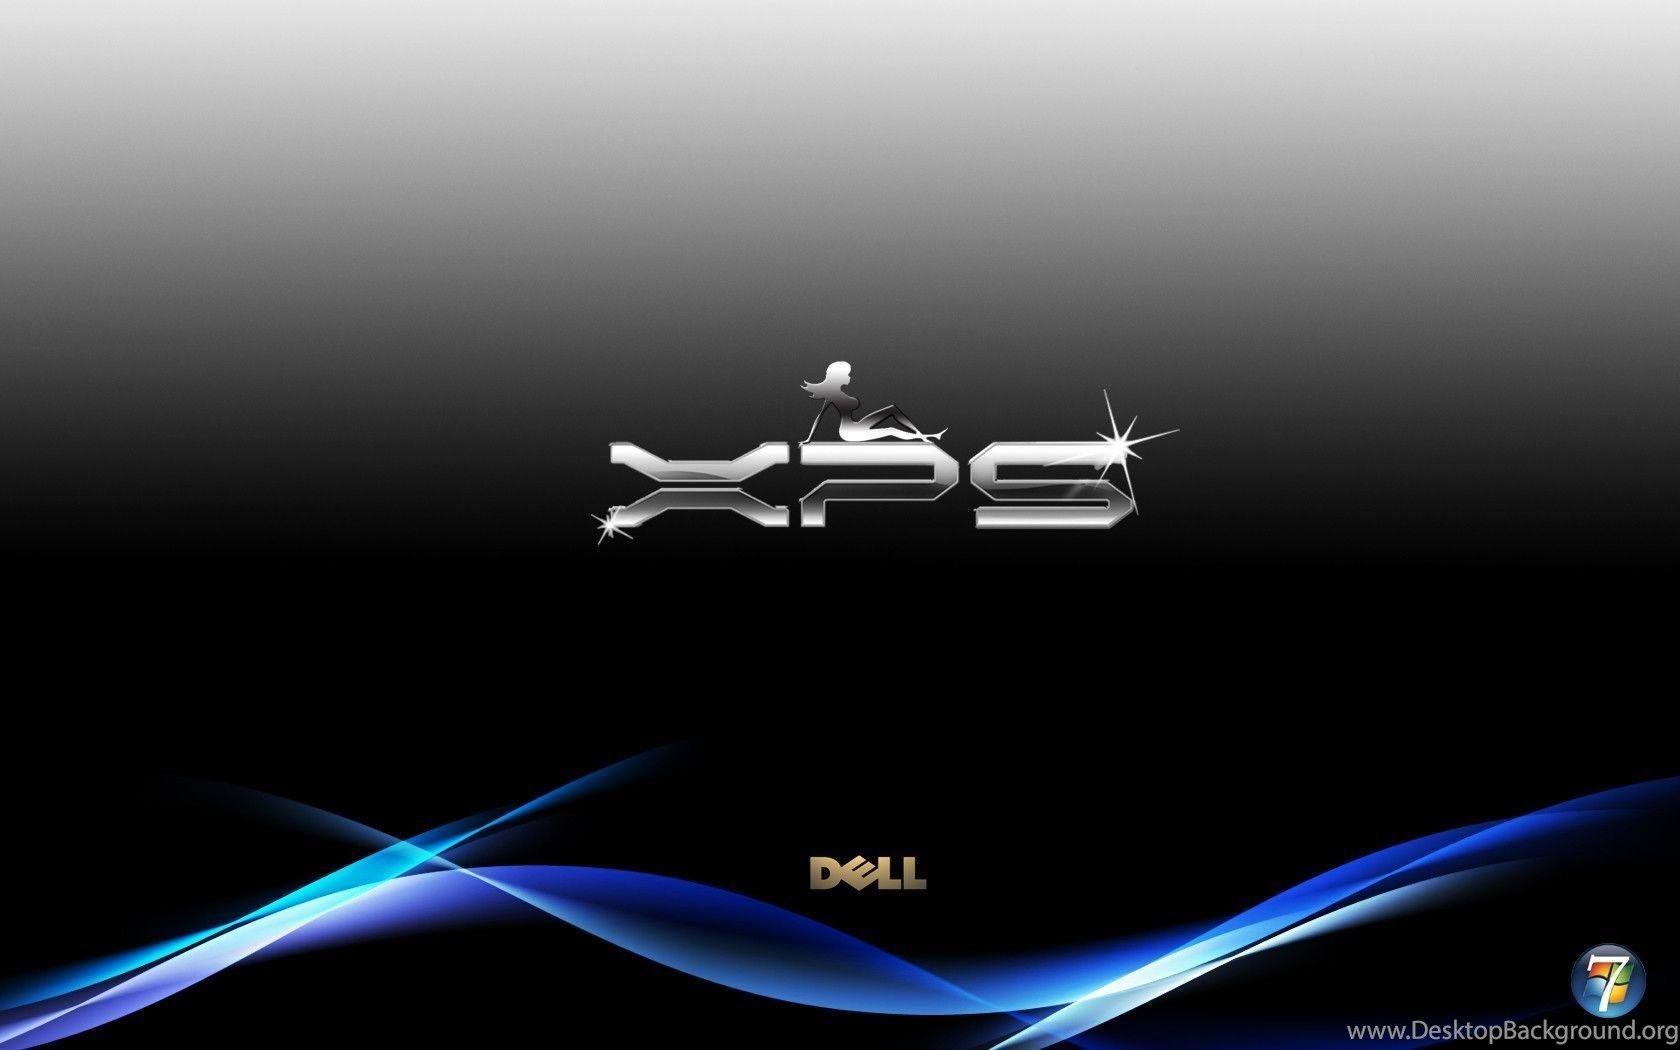 Dell Xps Laptop Wallpapers Top Free Dell Xps Laptop Backgrounds Wallpaperaccess